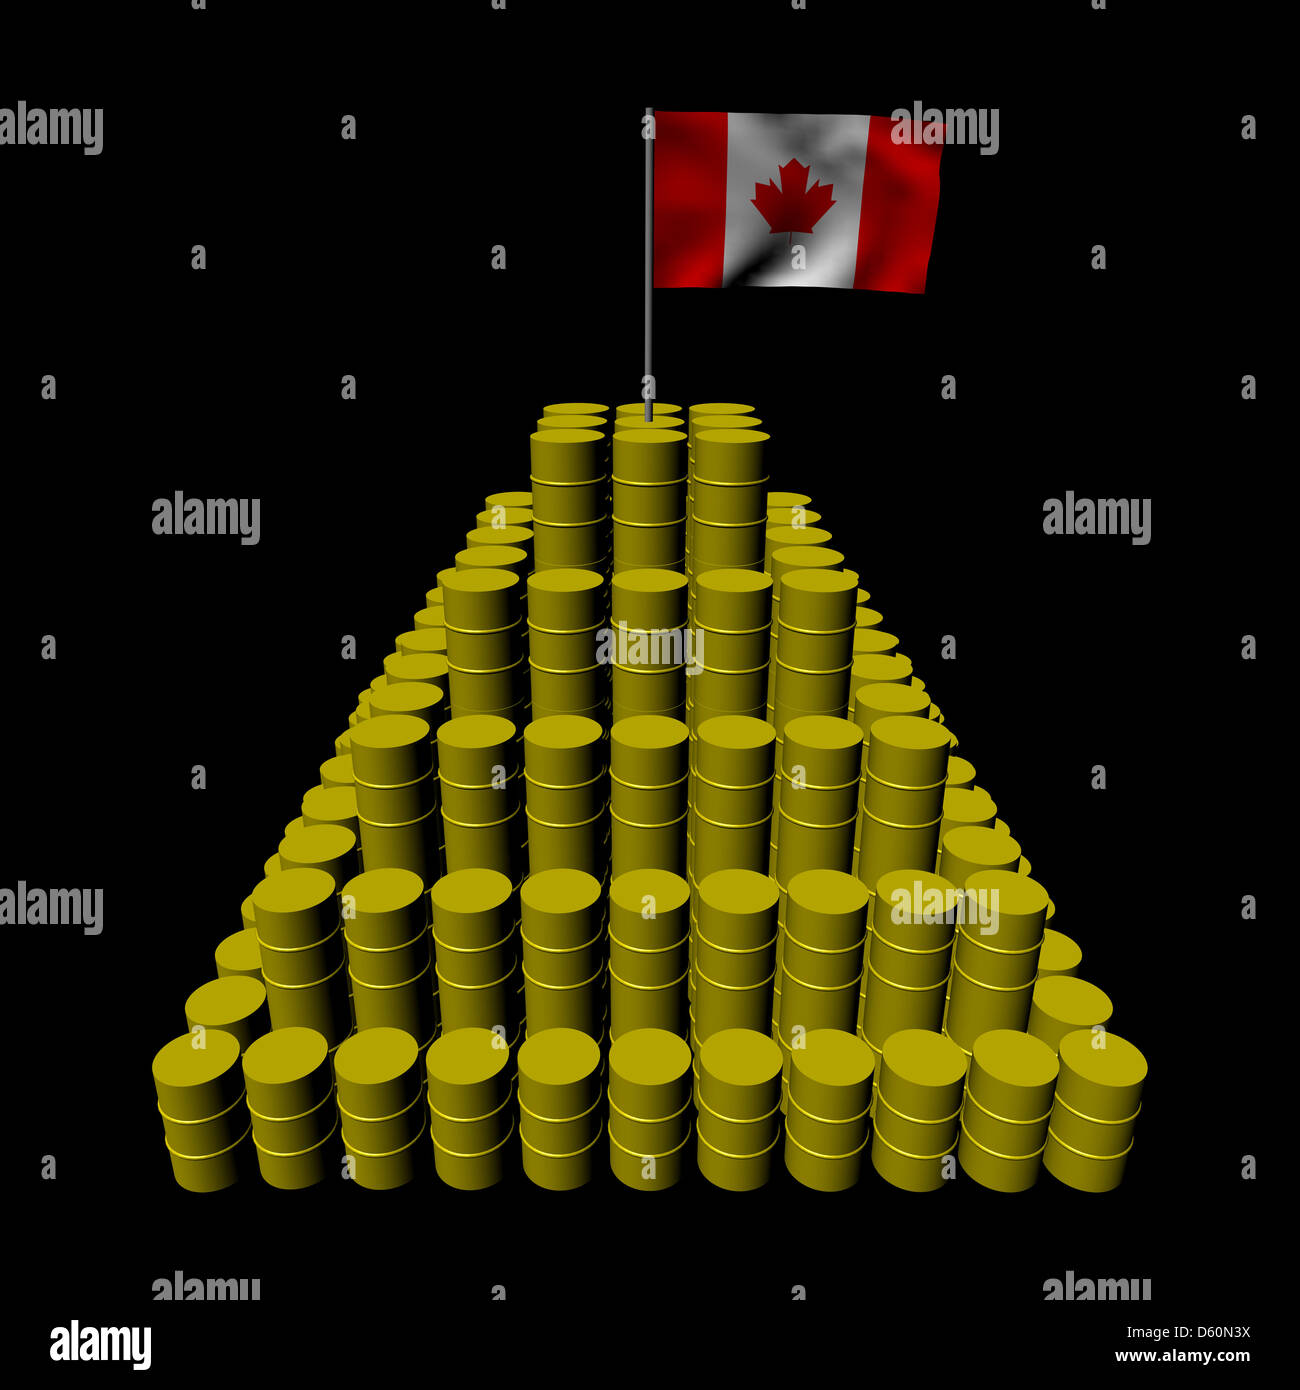 Stack of oil barrels with Canadian flag illustration Stock Photo